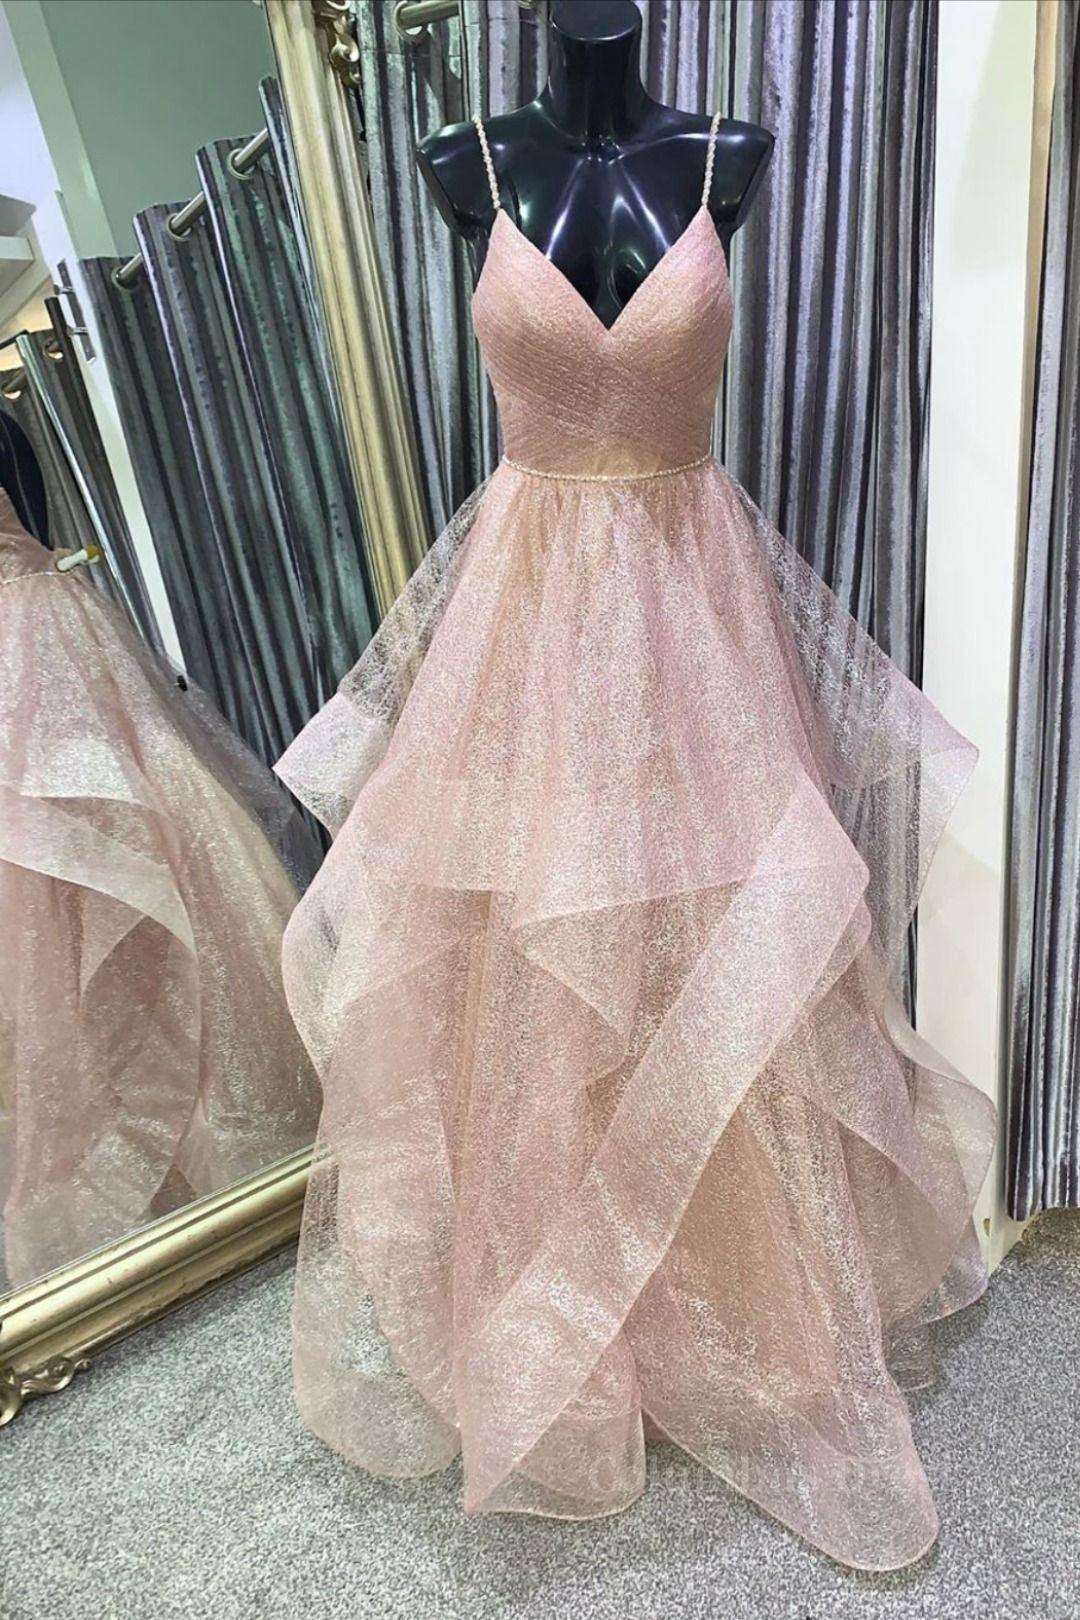 Casual Gown, Stylish V Neck Backless Rose Gold Long Prom Dress, Backless Rose Gold Formal Dress, Fluffy Rose Gold Evening Dress